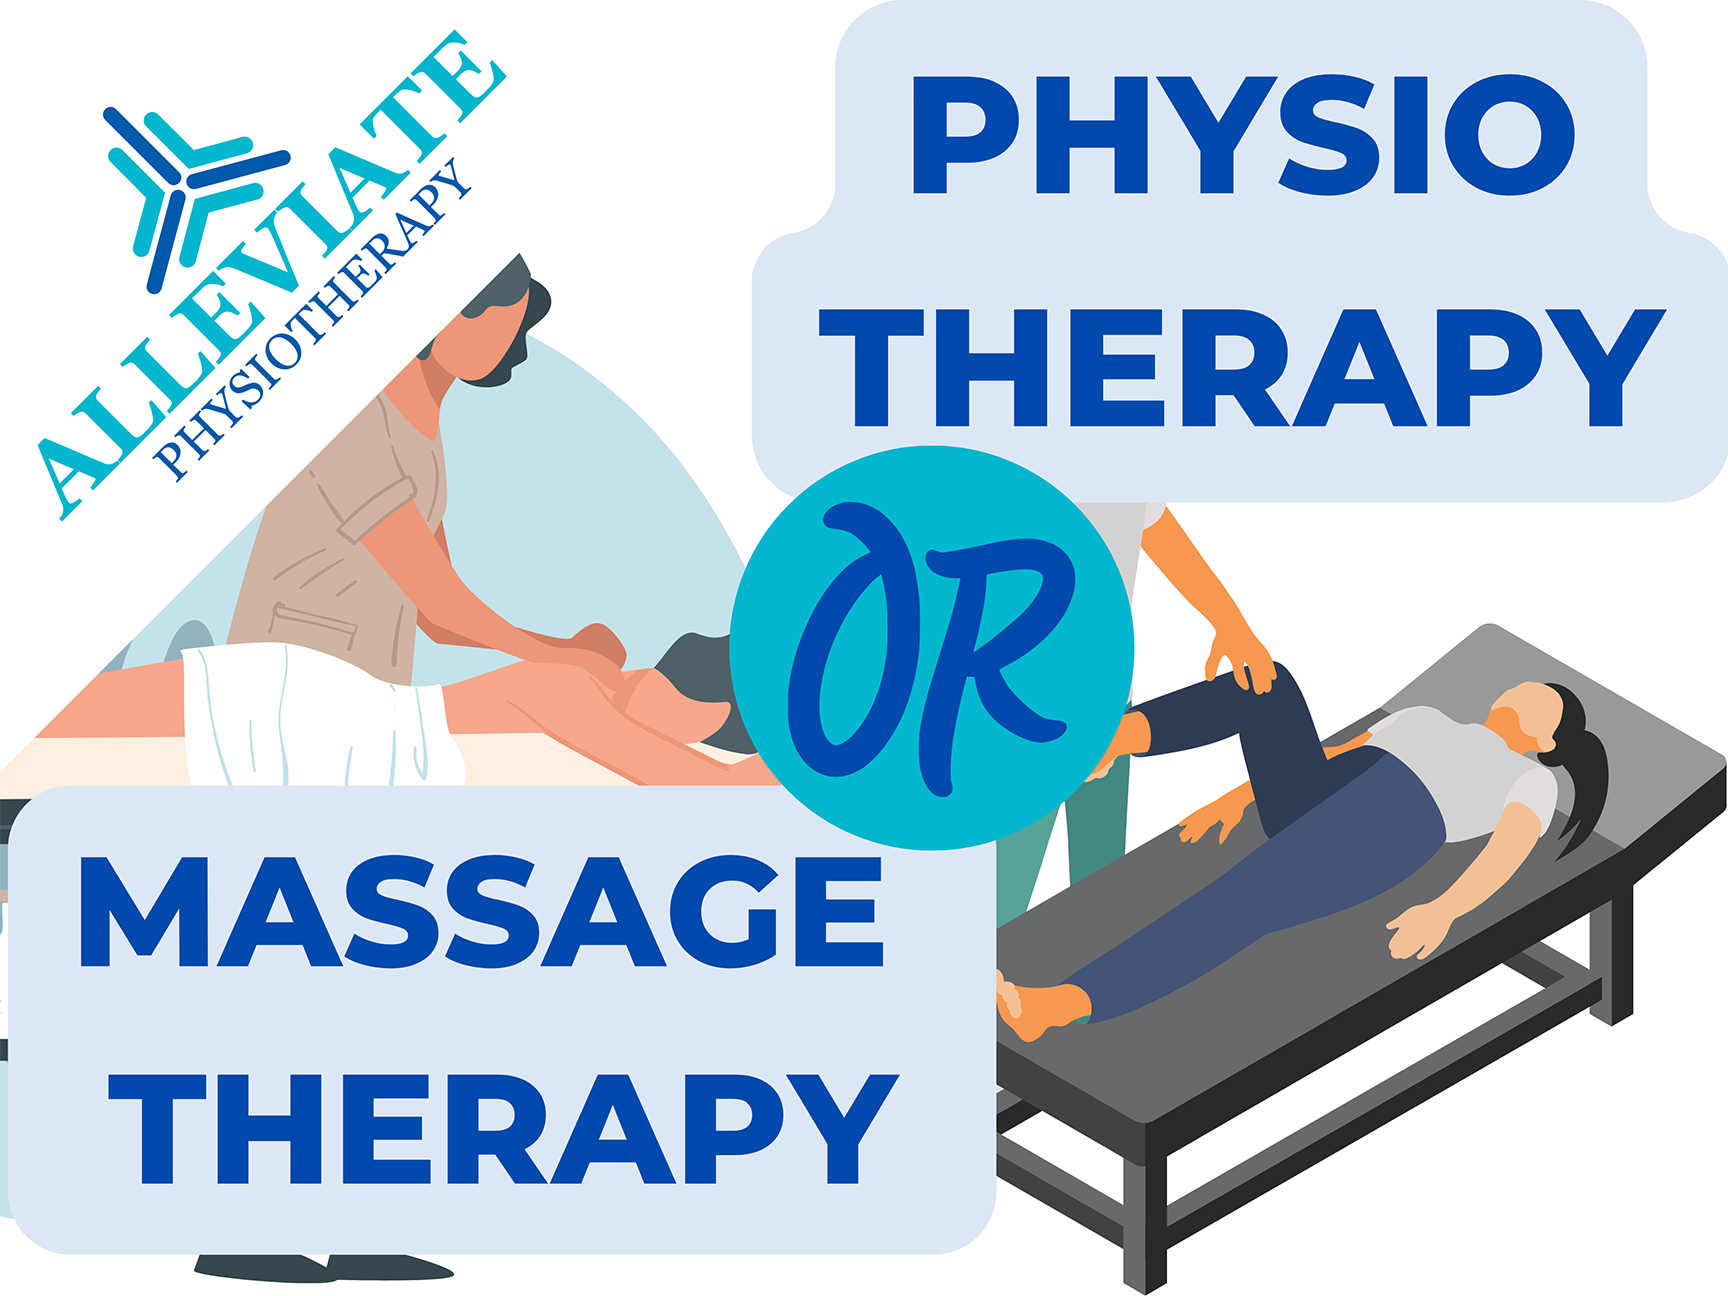 Massage therapy vs Physiotherapy